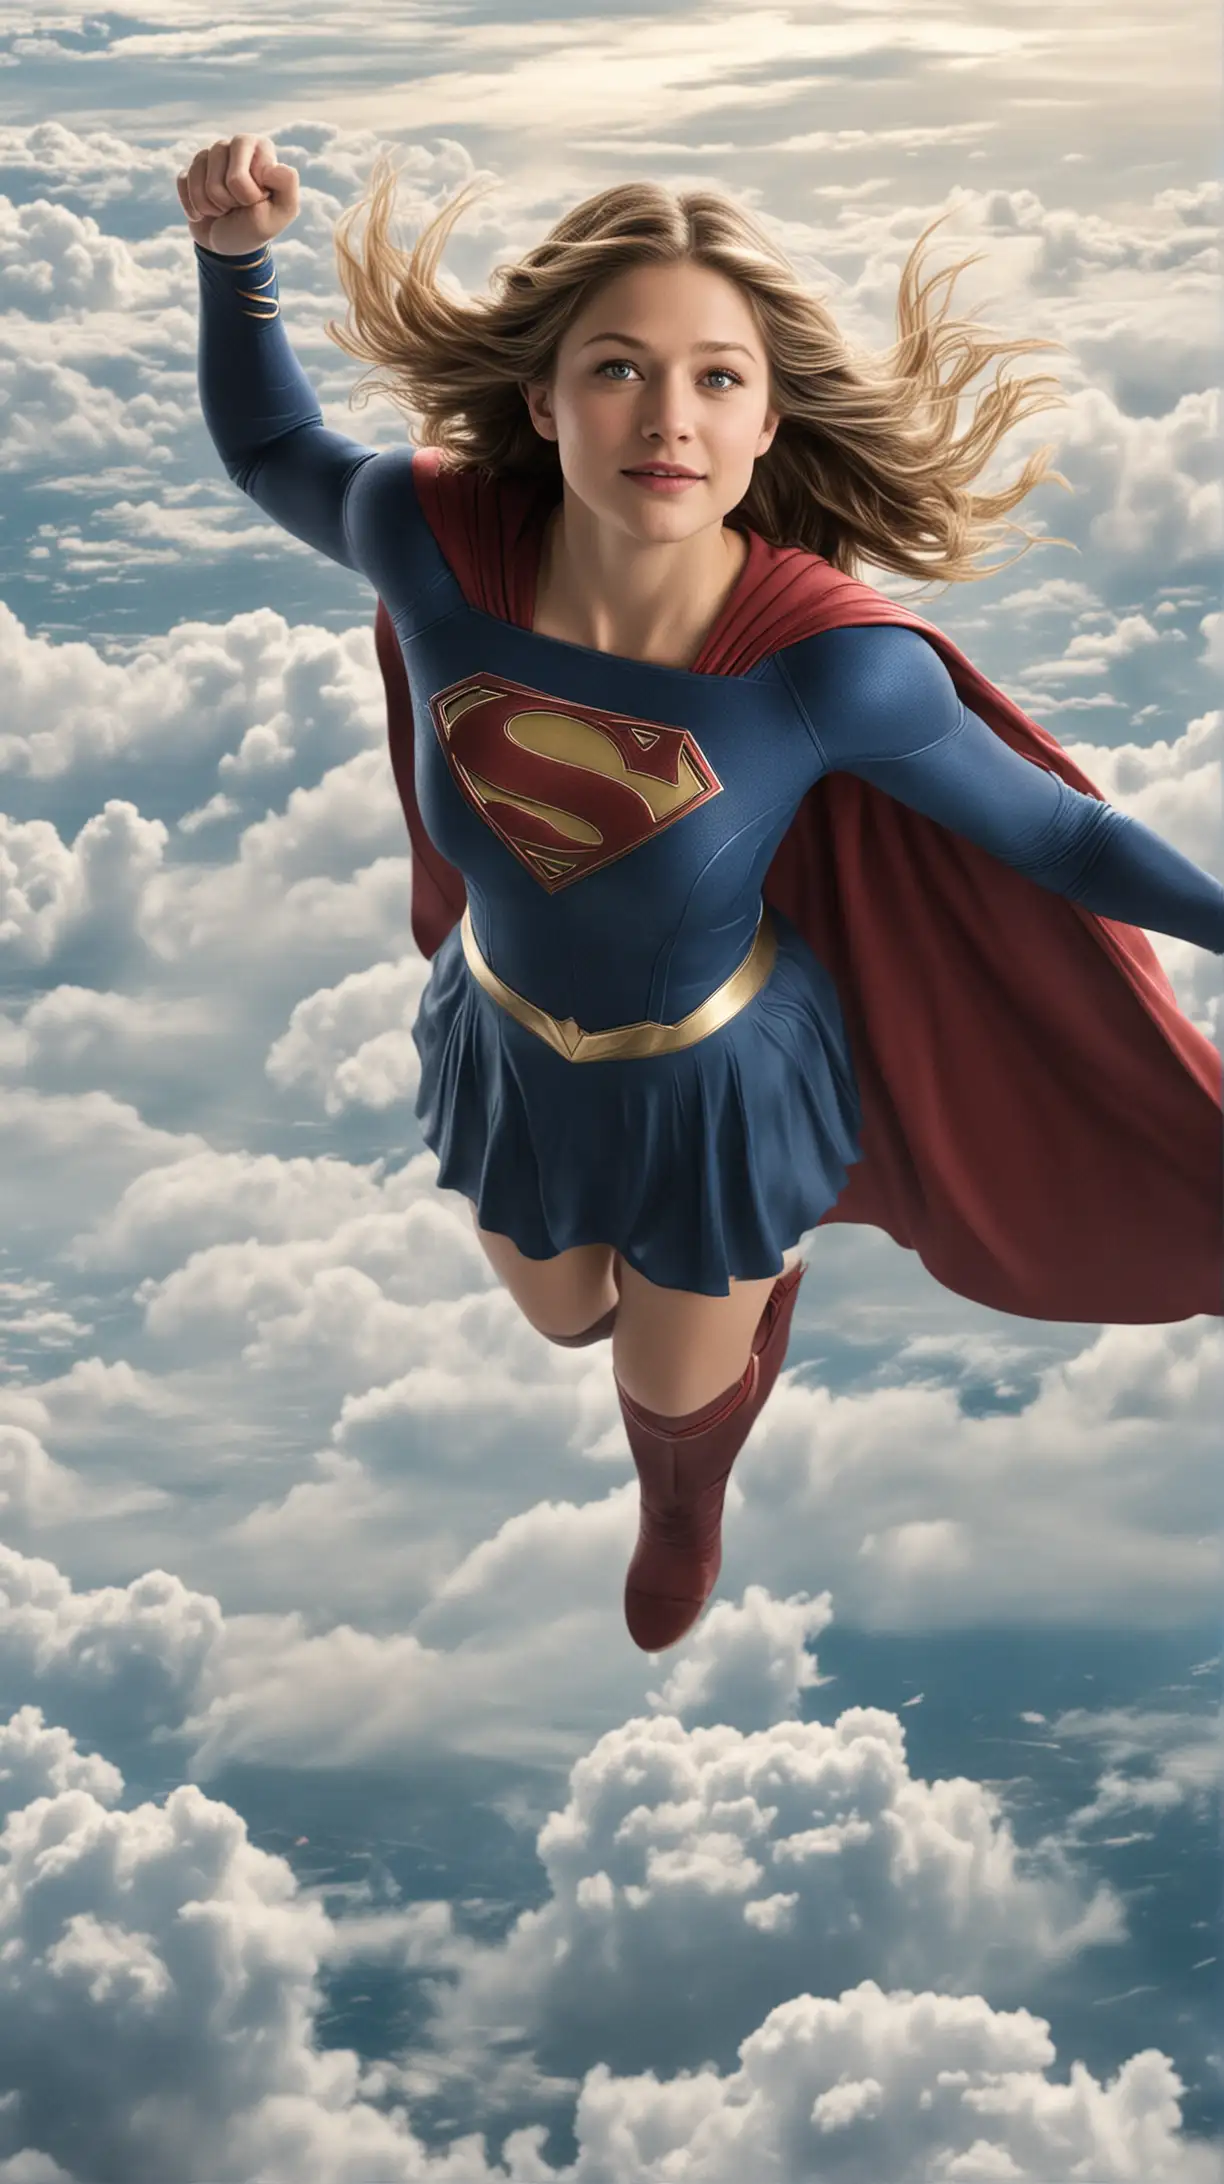 20-year-old Melissa Benoist with long hair floating above the clouds as Supergirl.